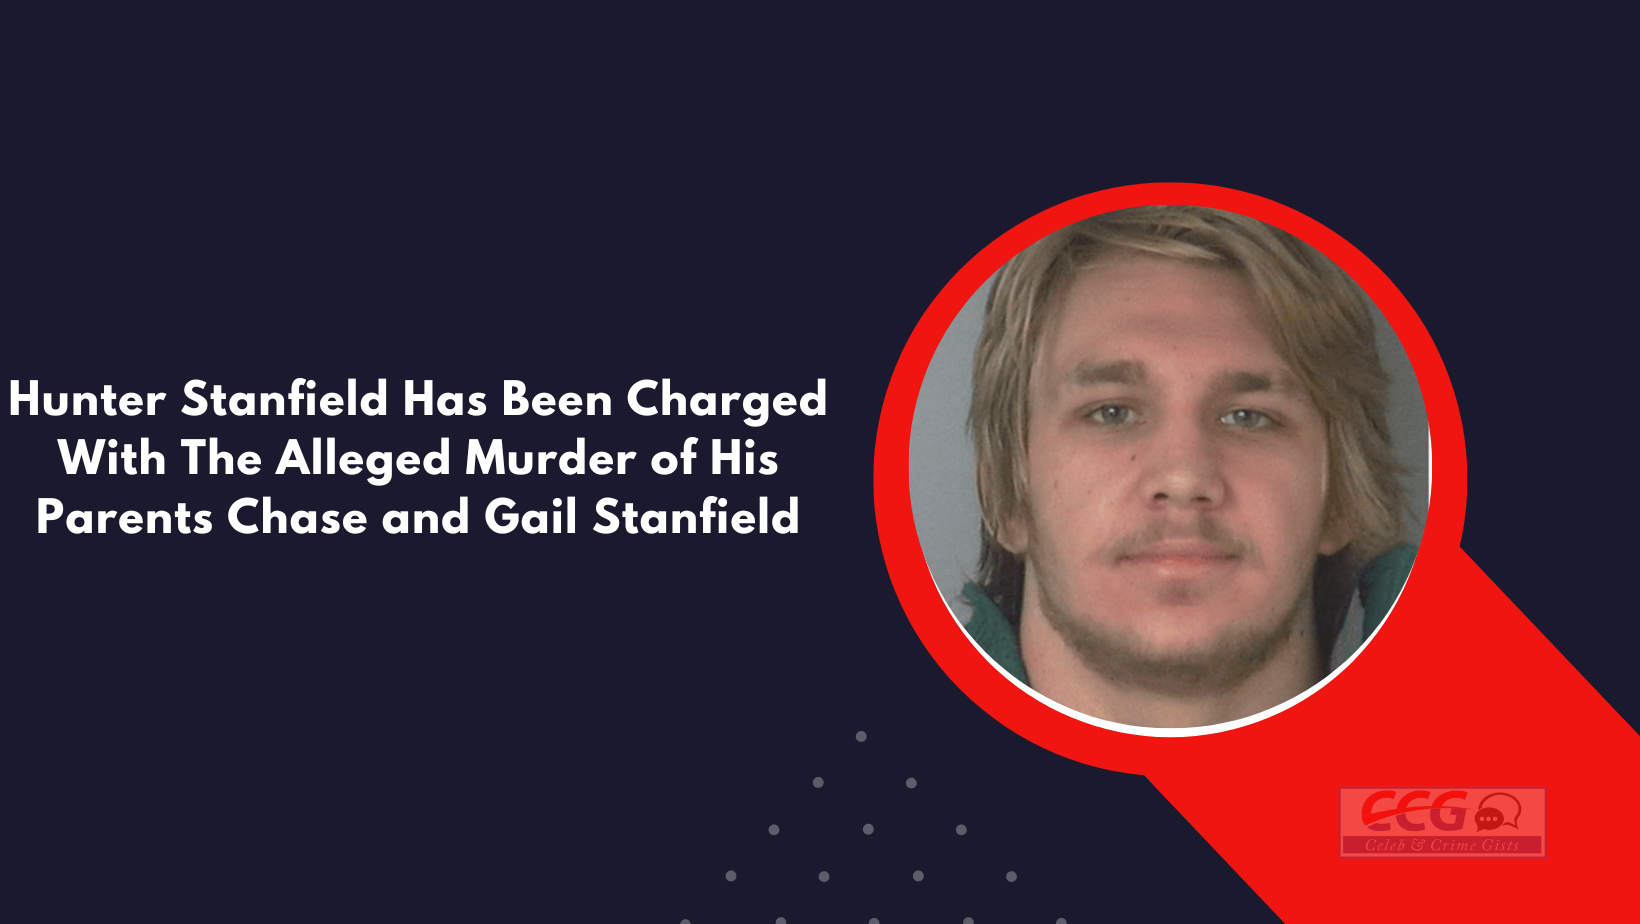 Hunter Stanfield Has Been Charged With The Alleged Murder of His Parents Chase and Gail Stanfield